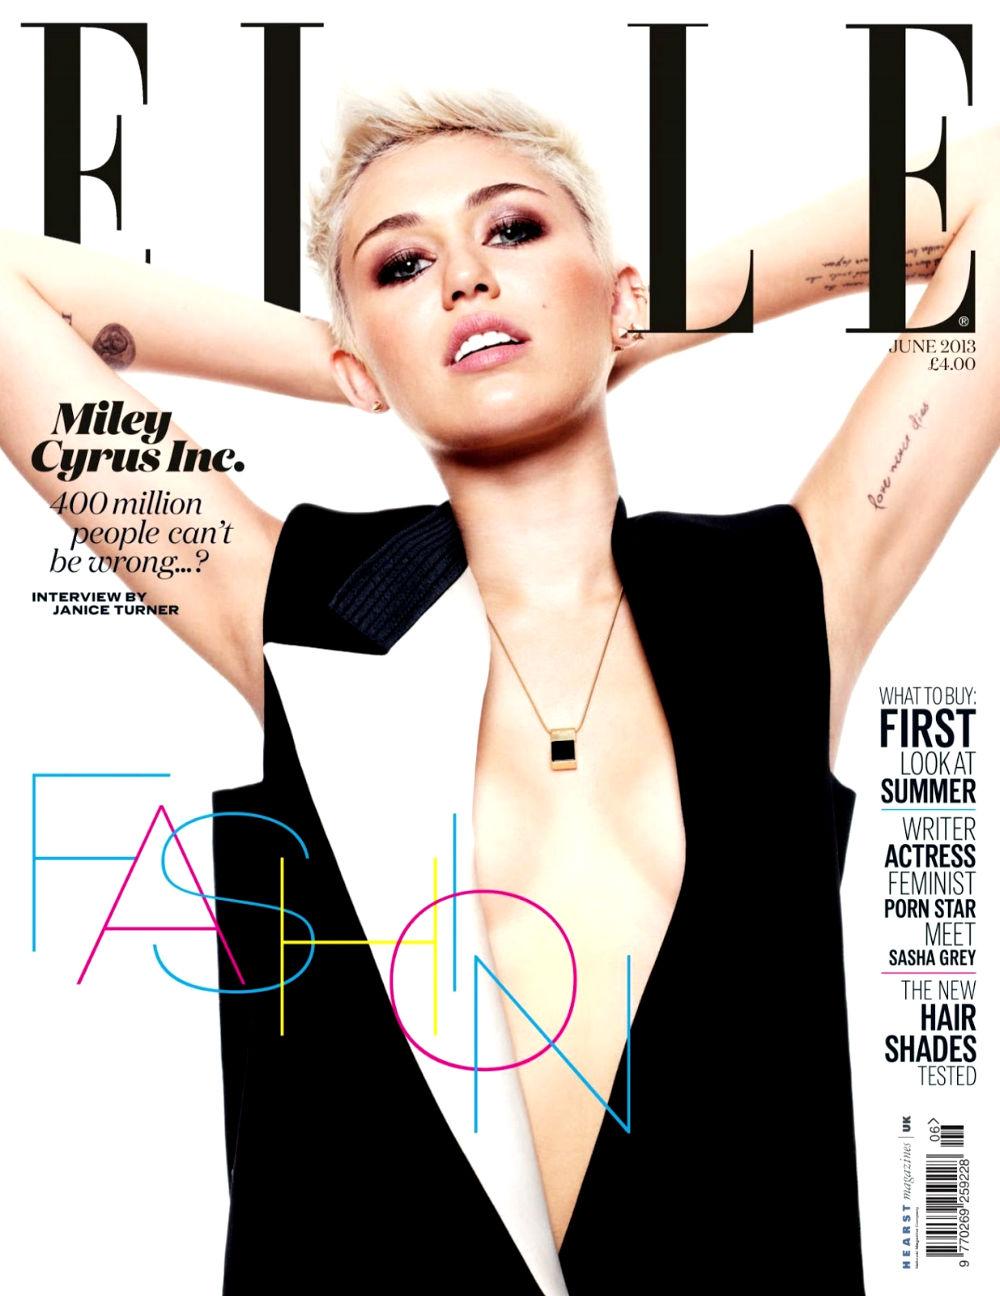 Miley Cyrus by Jan Welters for Elle UK June 2013